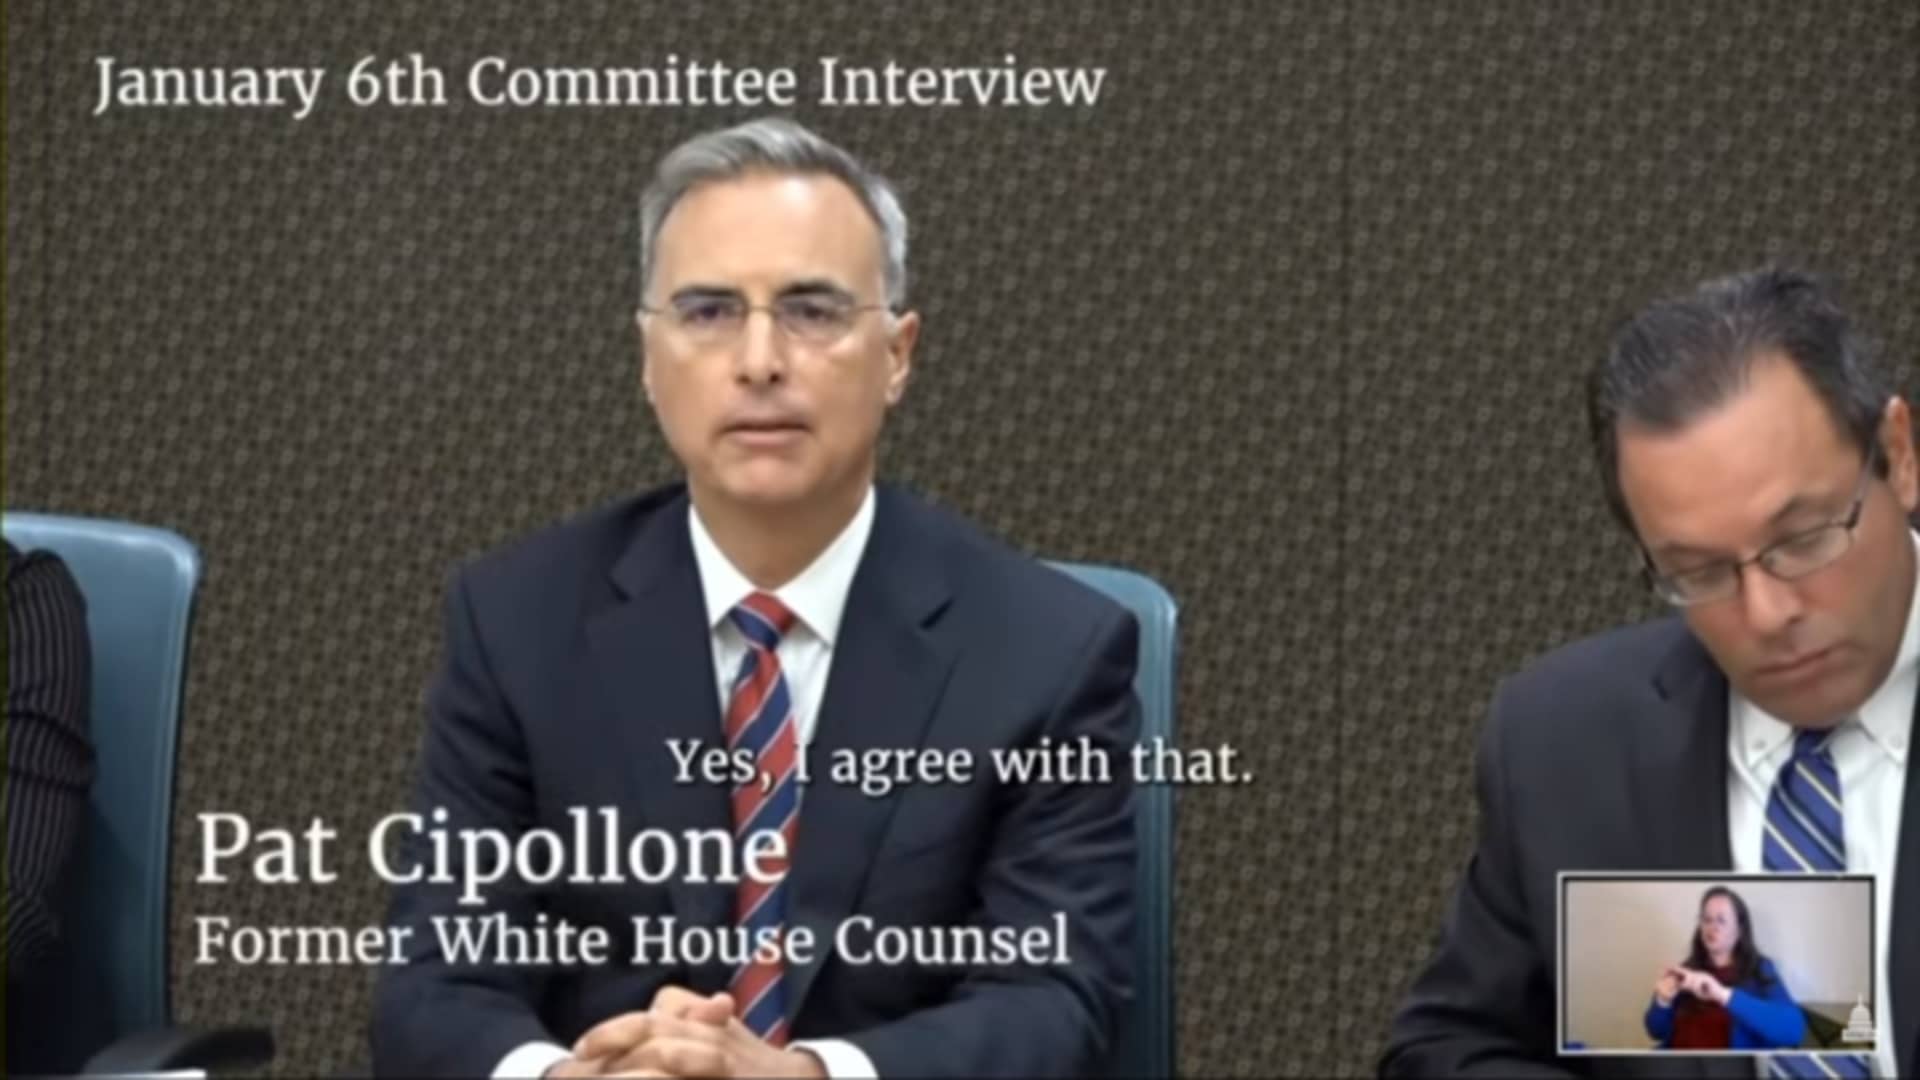 Former White House counsel during a January 6th Committee Interview.